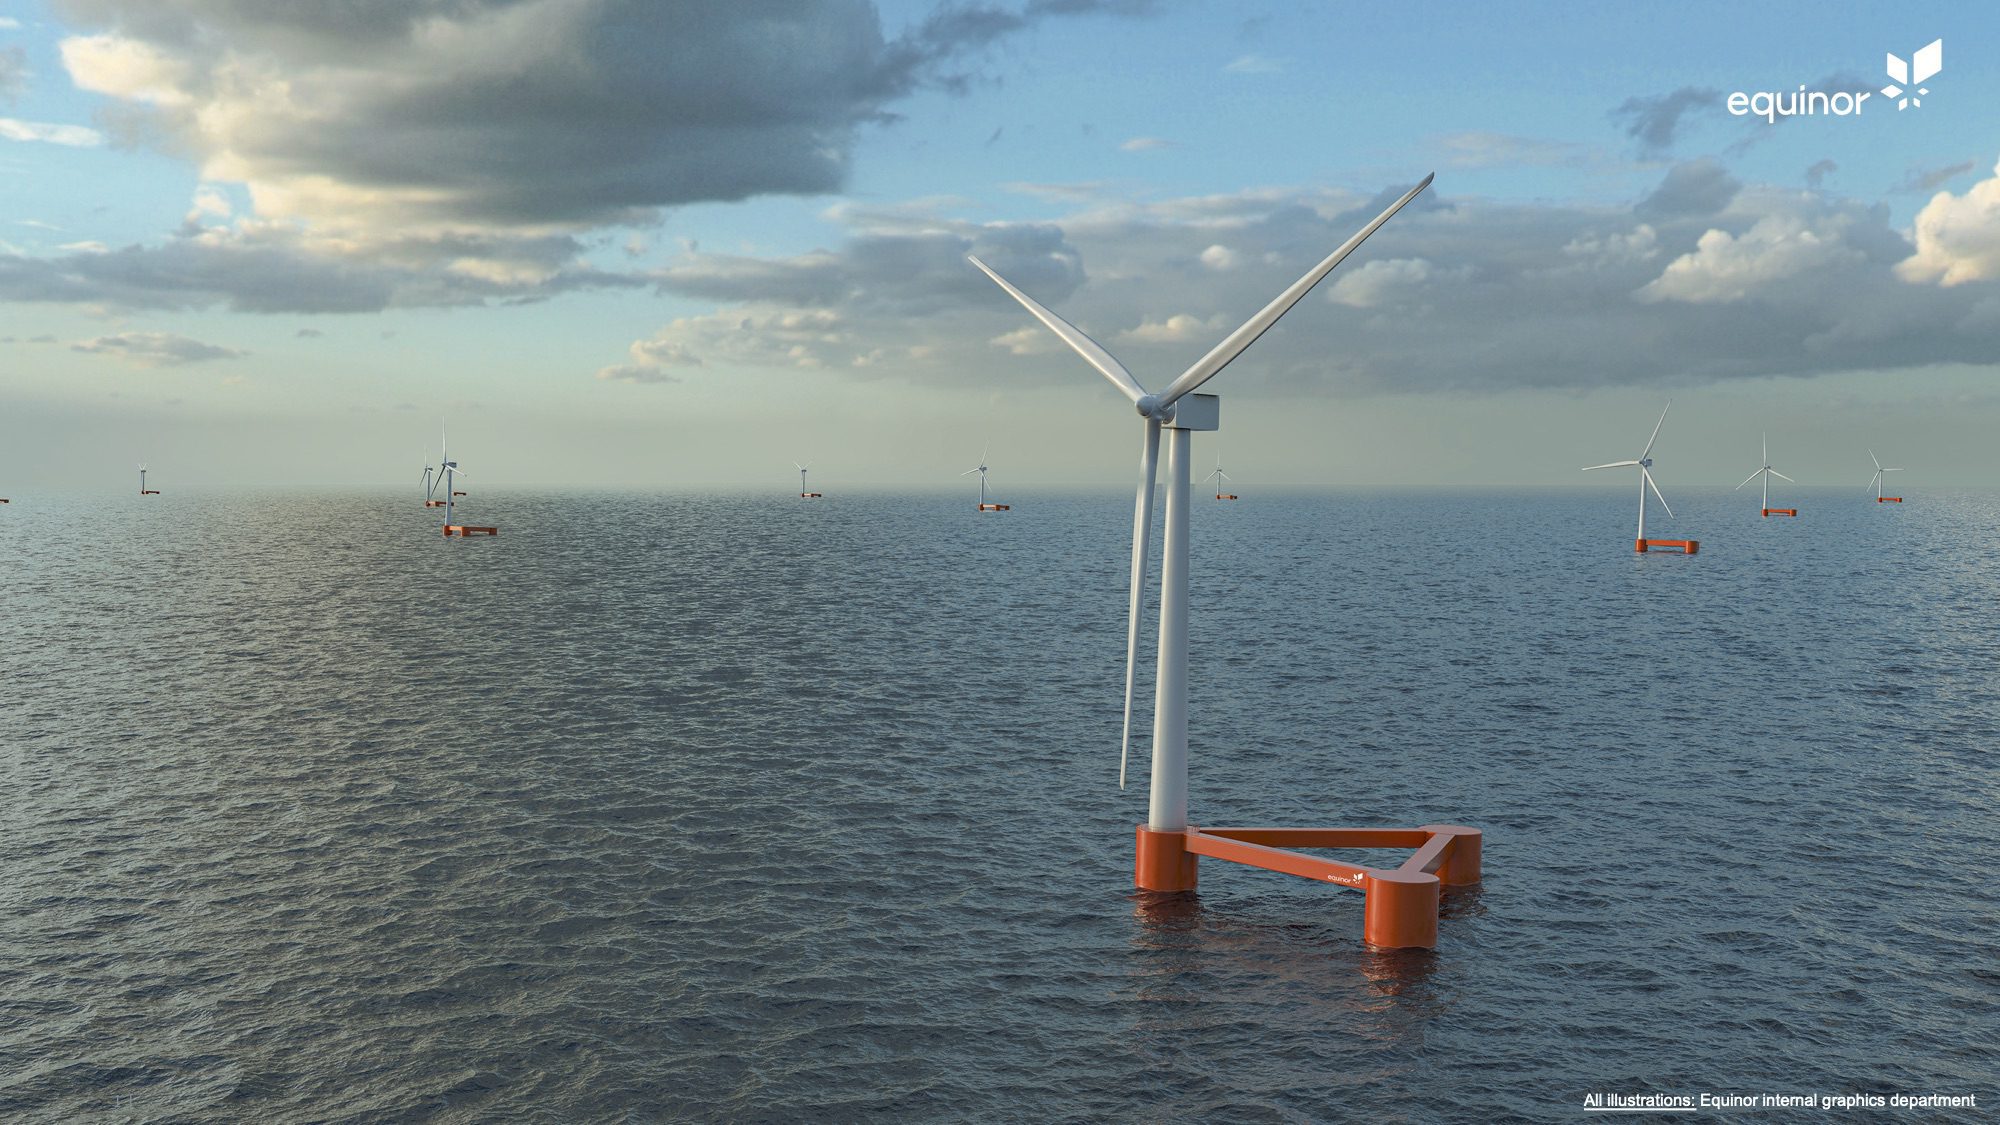 Norway’s Equinor Eyes Celtic Sea for ‘Gigawatt-Scale’ Floating Wind Farms